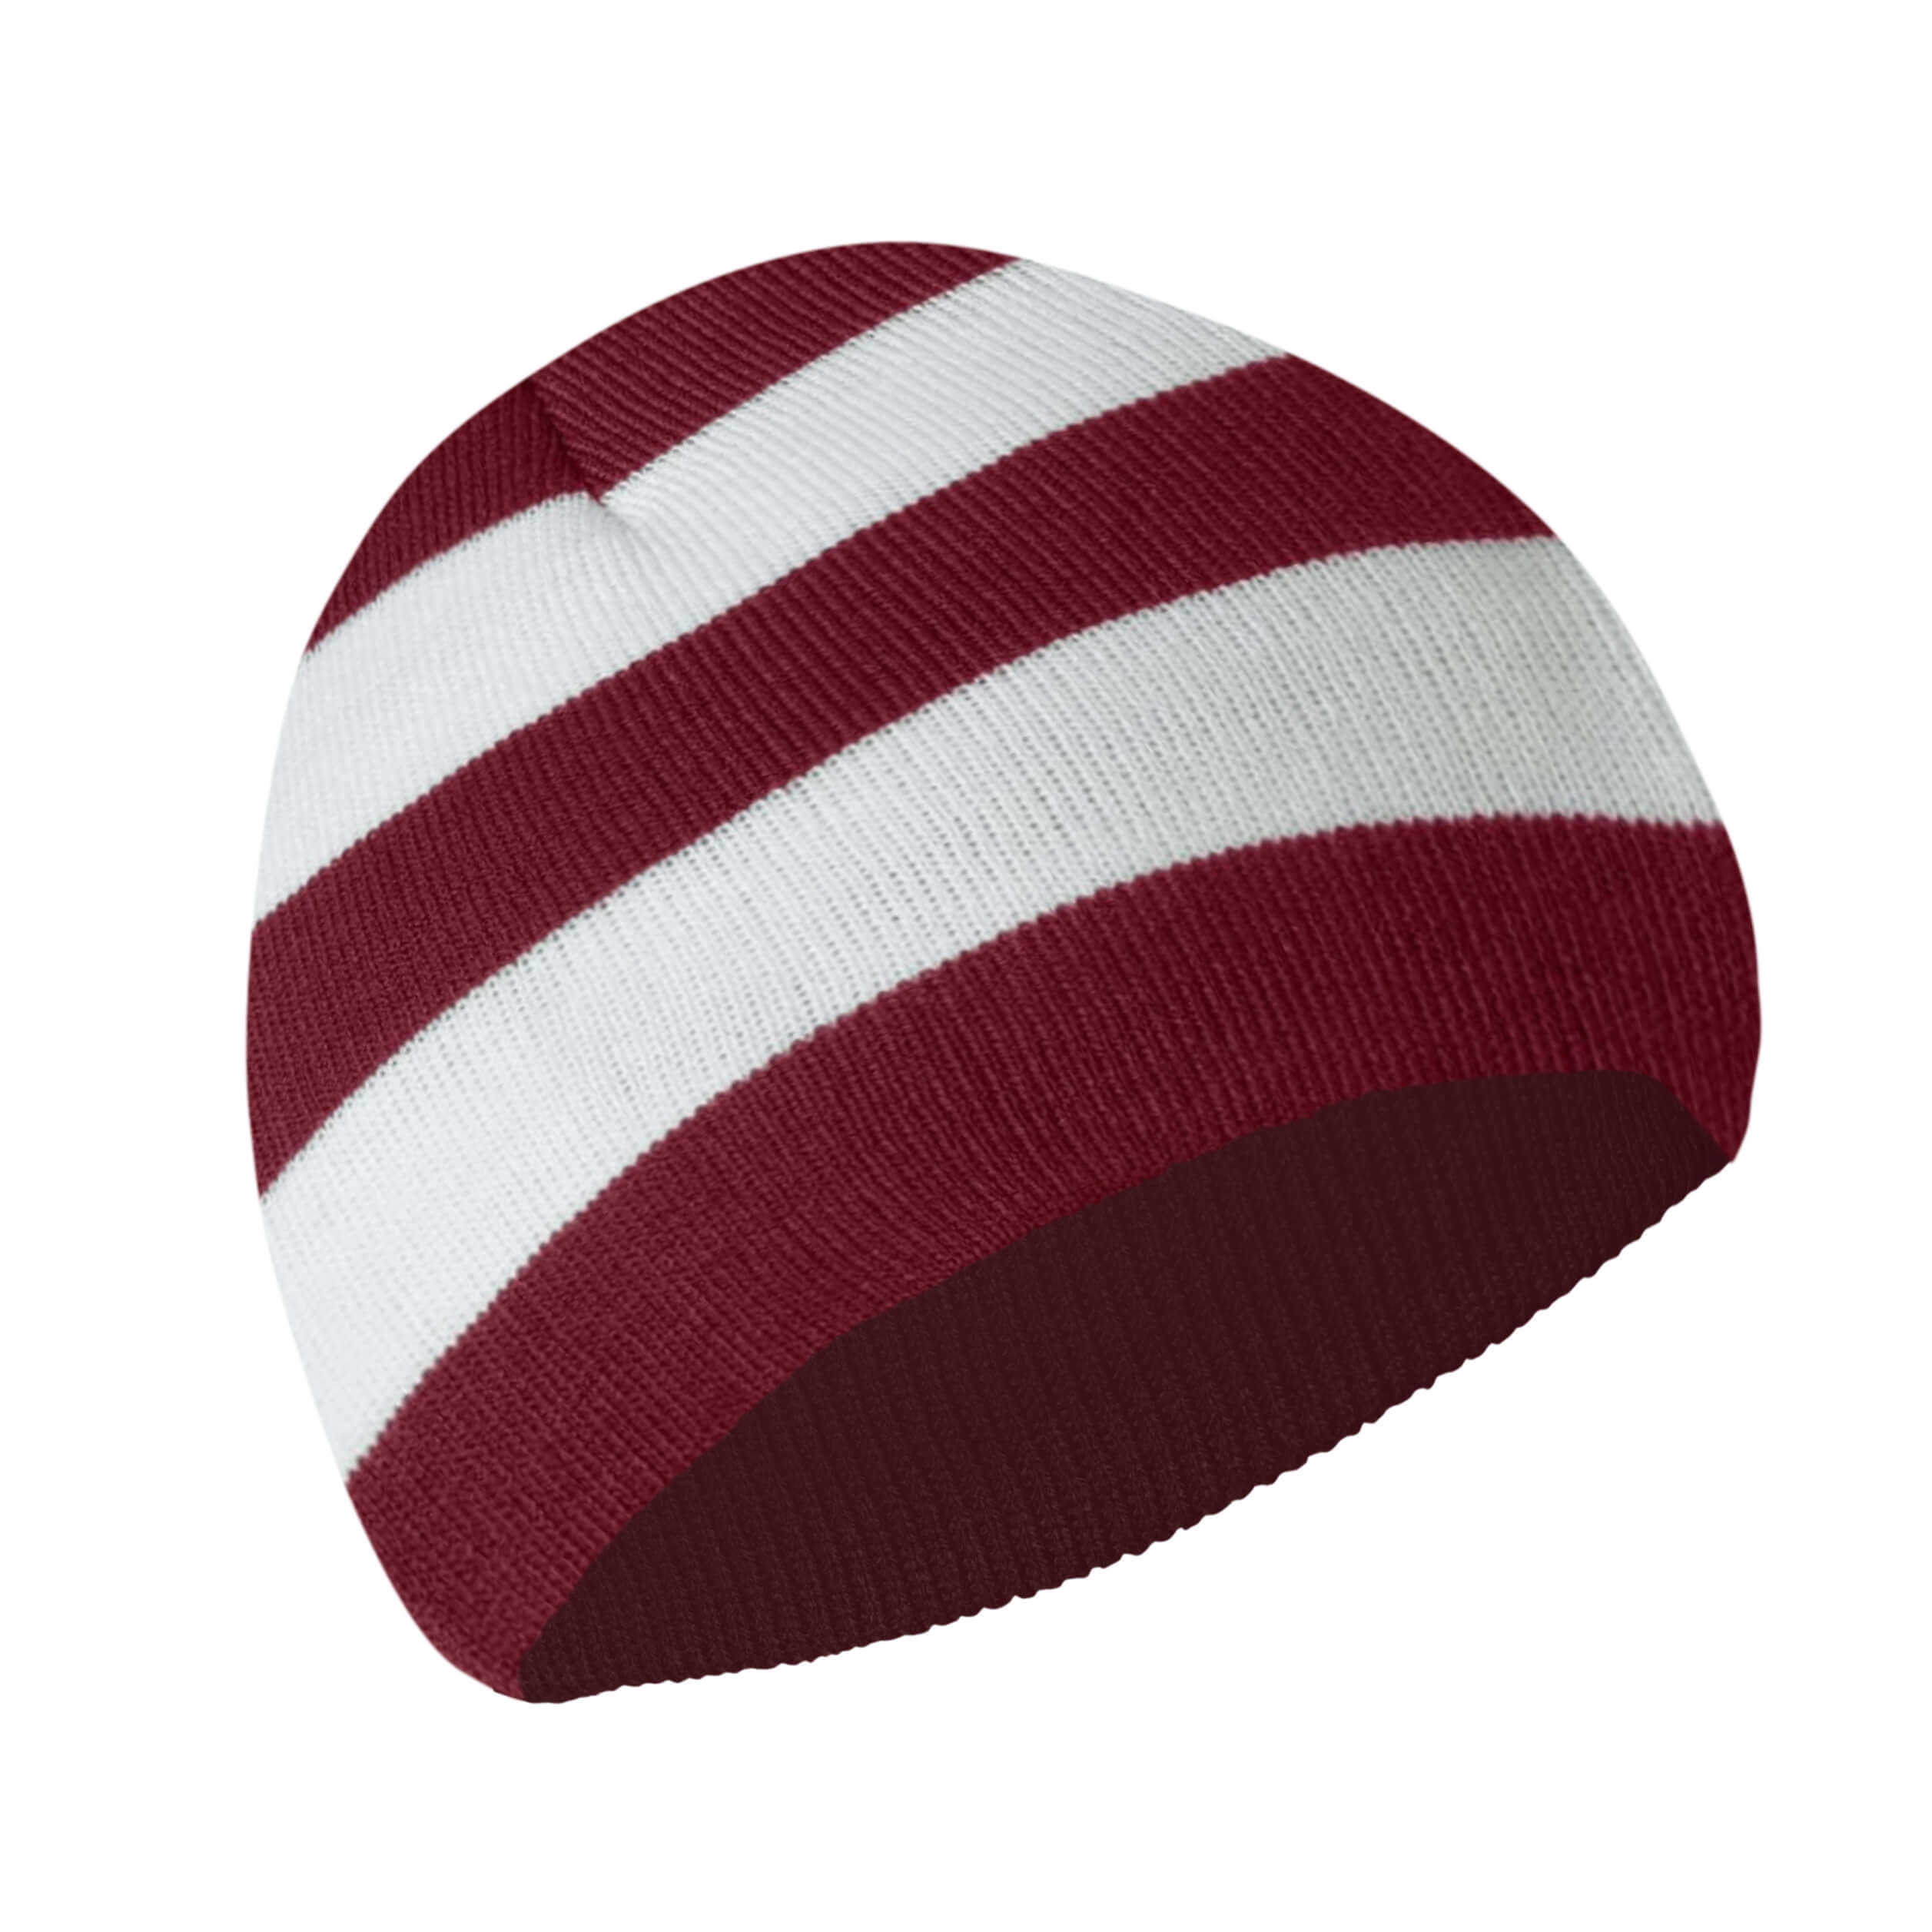 Knit Winter Rugby Striped Beanie Hats for Men & Women - Stay Warm & Stylish (Cardinal/ White)